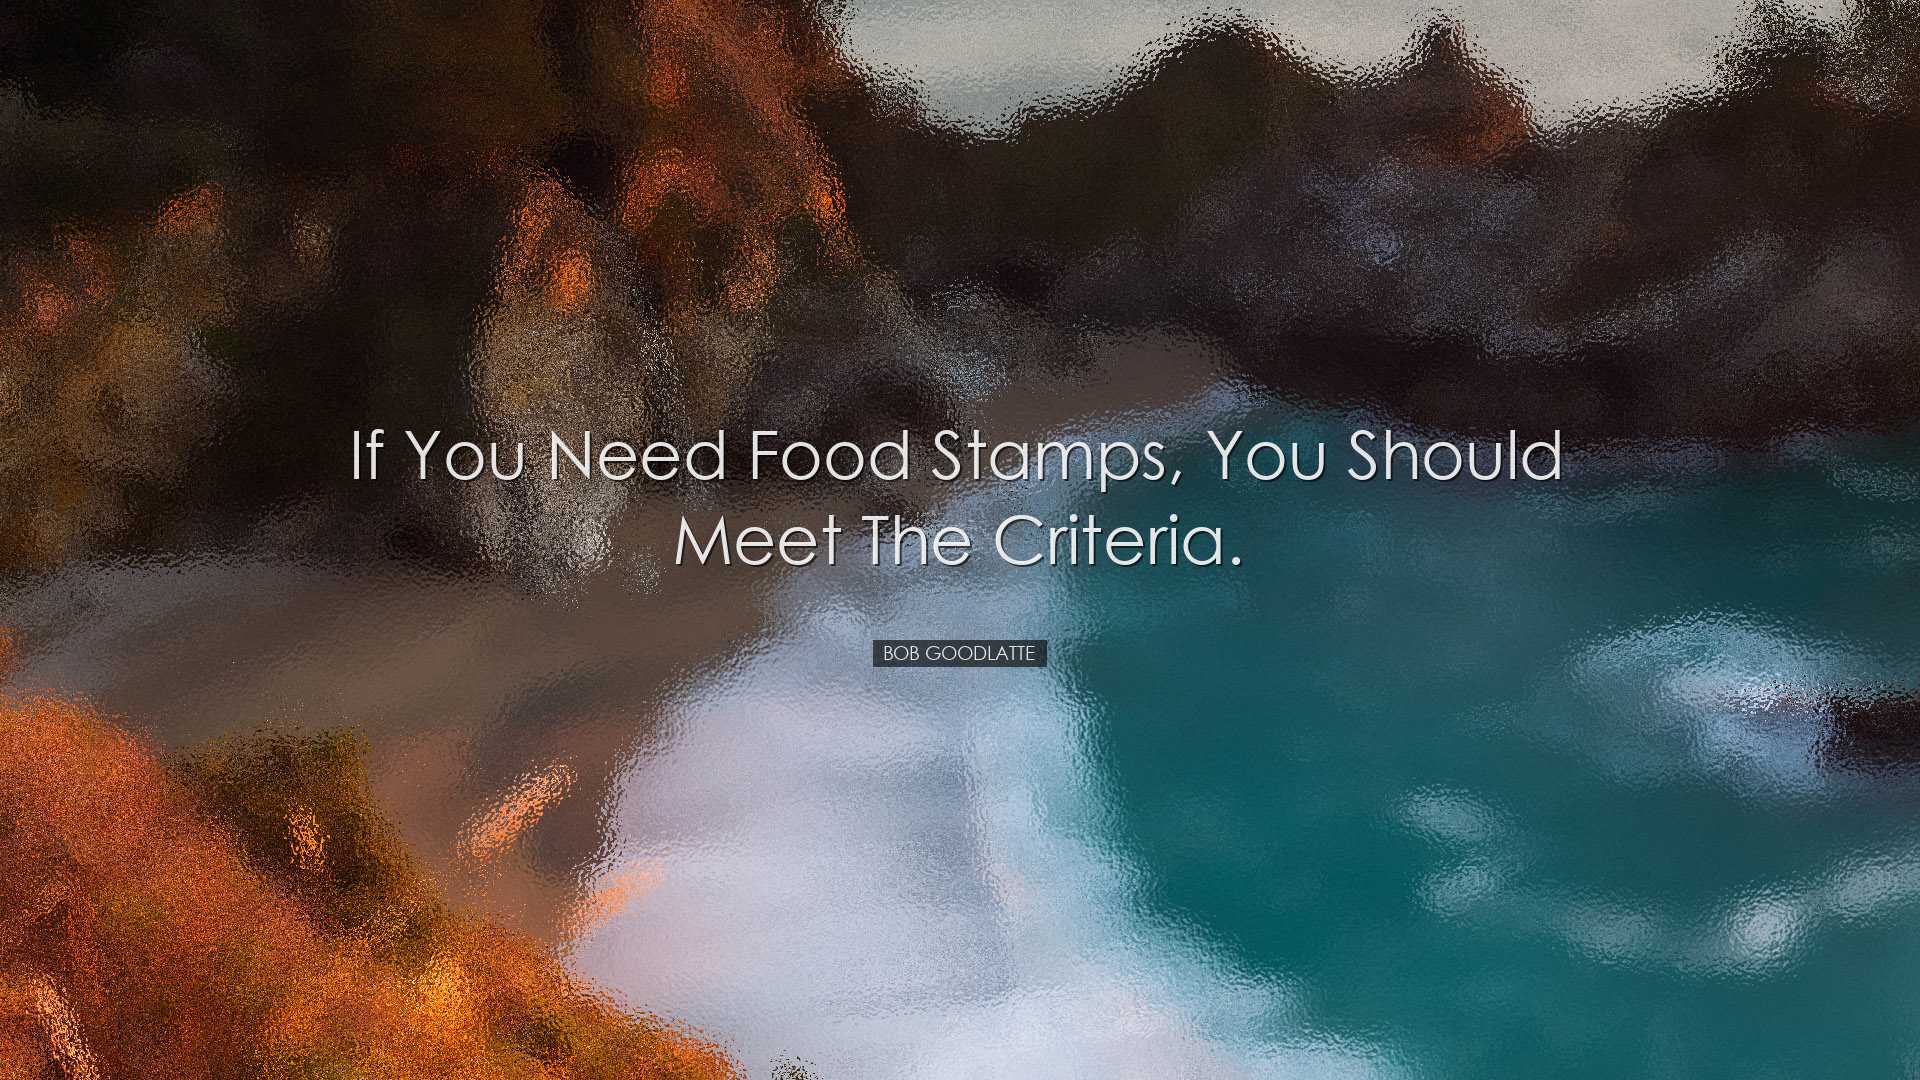 If you need food stamps, you should meet the criteria. - Bob Goodl